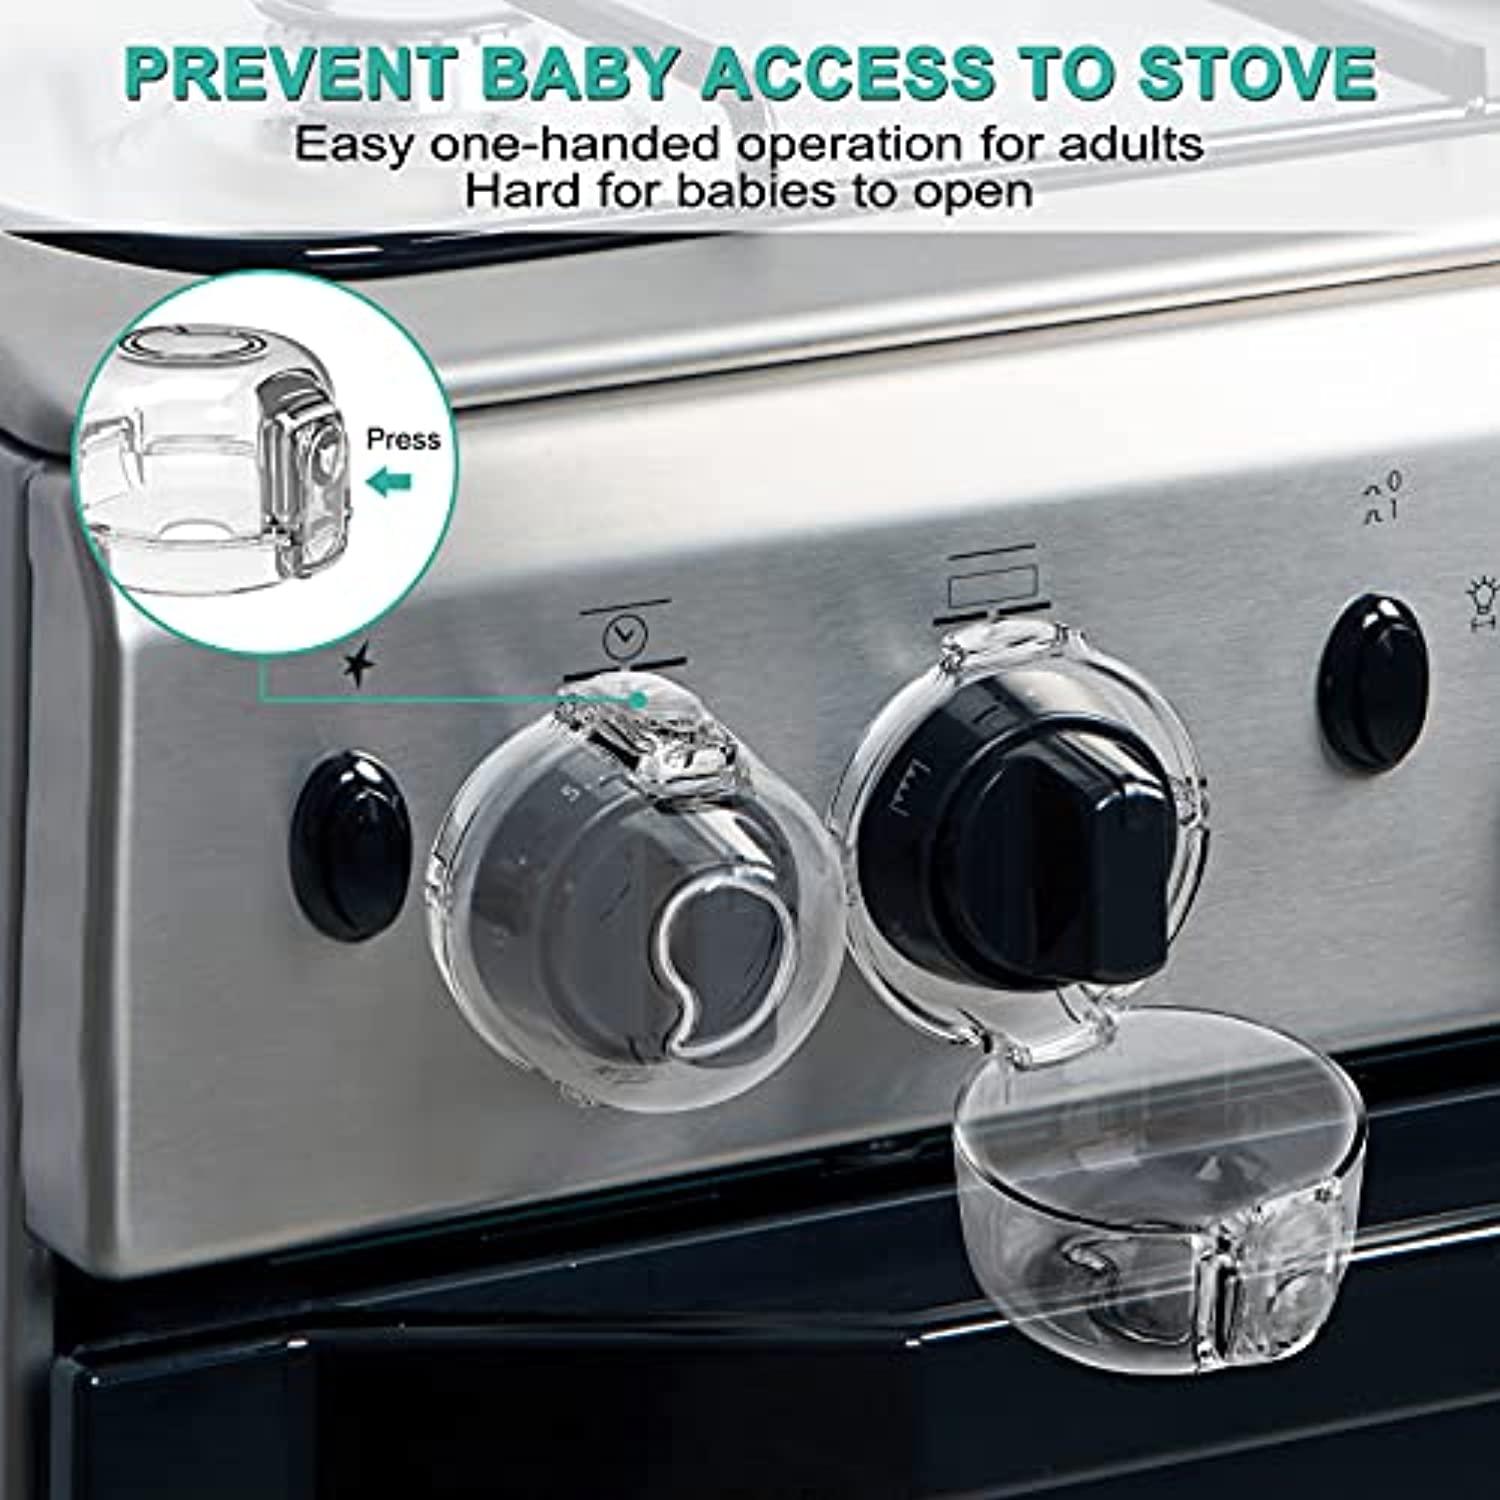 2 Pcs Child Safety Oven Door Lock,Heat-Resistant Baby Proof Oven Lock for  Kitchen Safety, Use 3M Adhesive (Clear-Black)